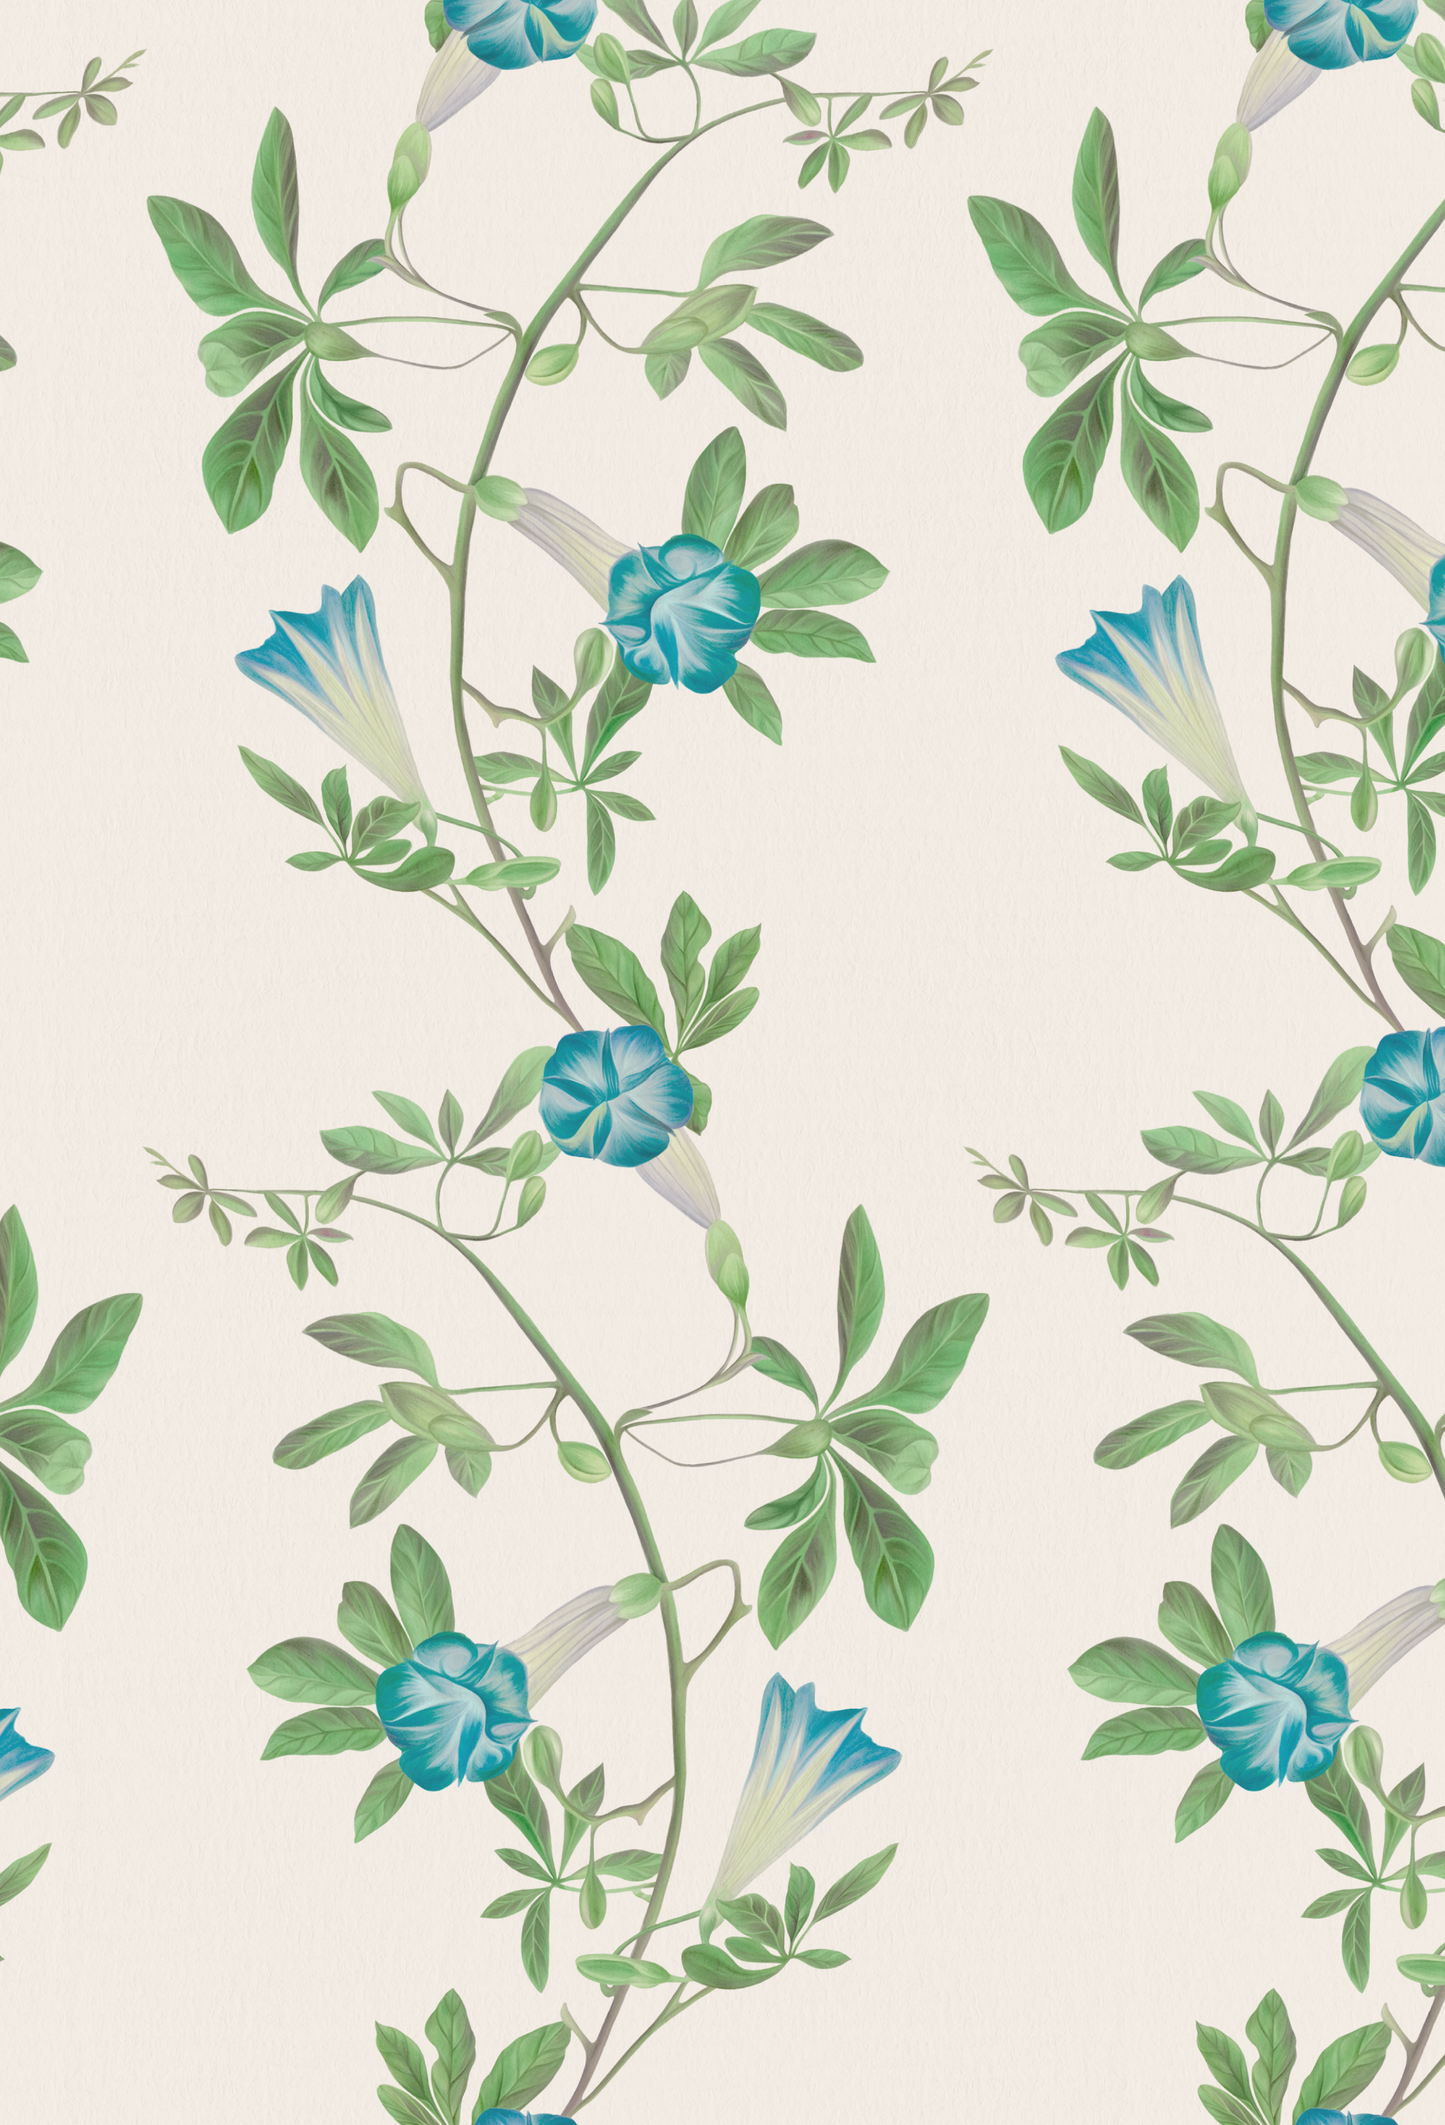 Small blue flowers on green vines with leaves featuring the Midsummer Wallpaper in Linen by Deus ex Gardenia.